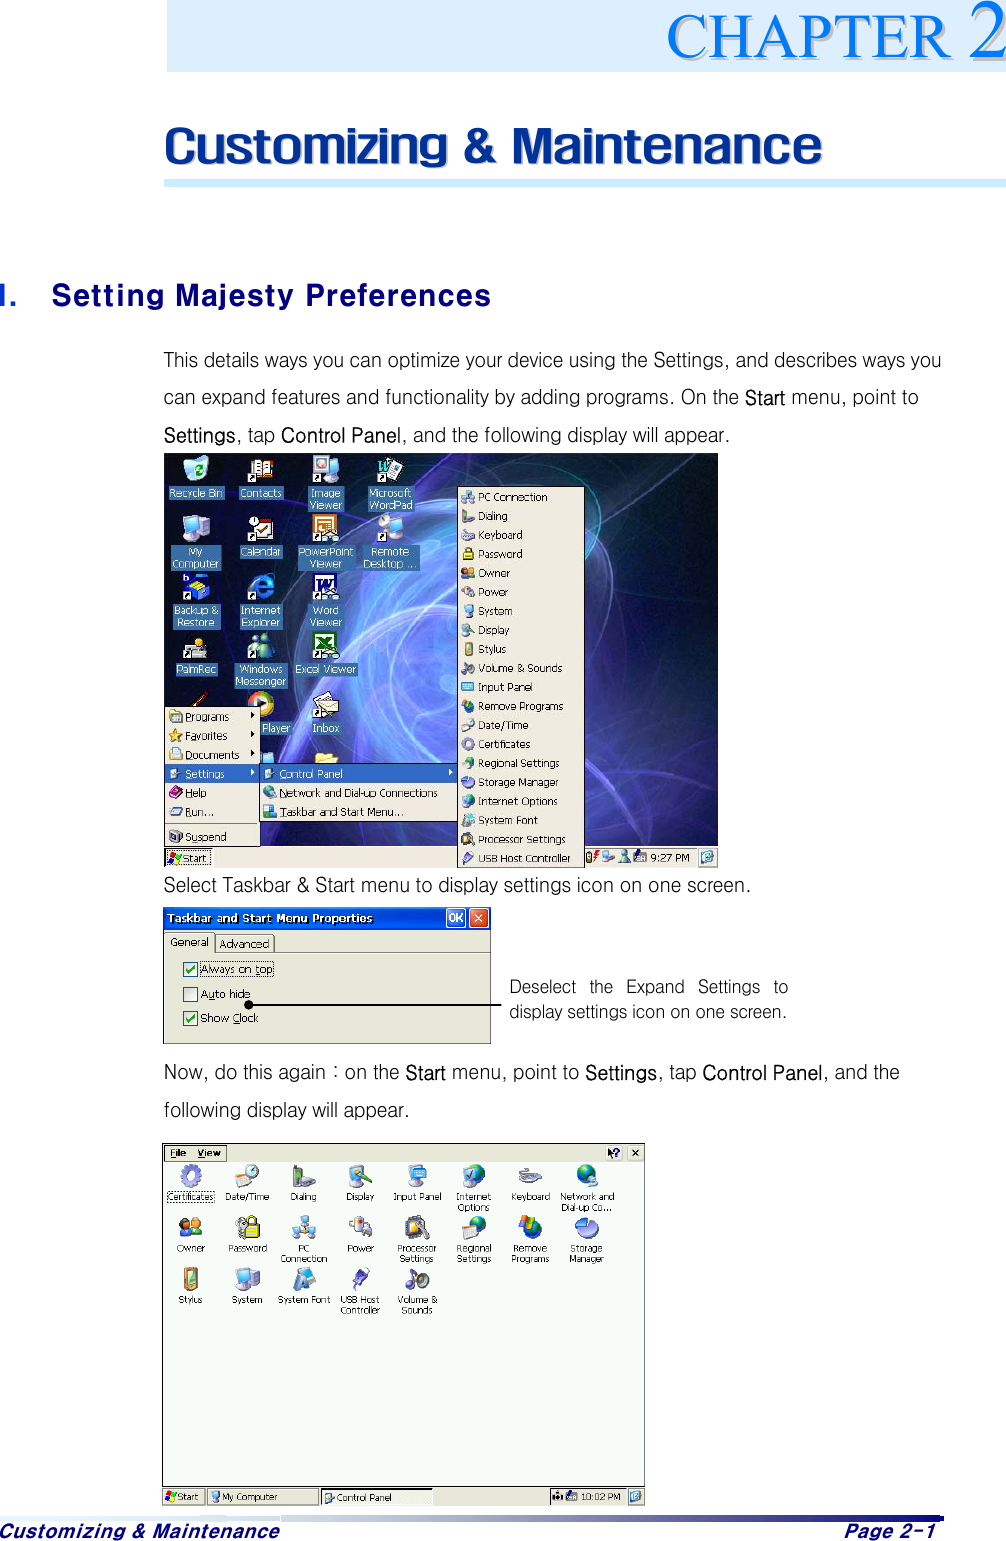 Customizing &amp; Maintenance  Page 2-1  CCuussttoommiizziinngg  &amp;&amp;  MMaaiinntteennaannccee    I.  Setting Majesty Preferences This details ways you can optimize your device using the Settings, and describes ways you can expand features and functionality by adding programs. On the Start menu, point to Settings, tap Control Panel, and the following display will appear.             Select Taskbar &amp; Start menu to display settings icon on one screen.     Now, do this again : on the Start menu, point to Settings, tap Control Panel, and the following display will appear.           CCHHAAPPTTEERR22Deselect  the  Expand  Settings  todisplay settings icon on one screen. 